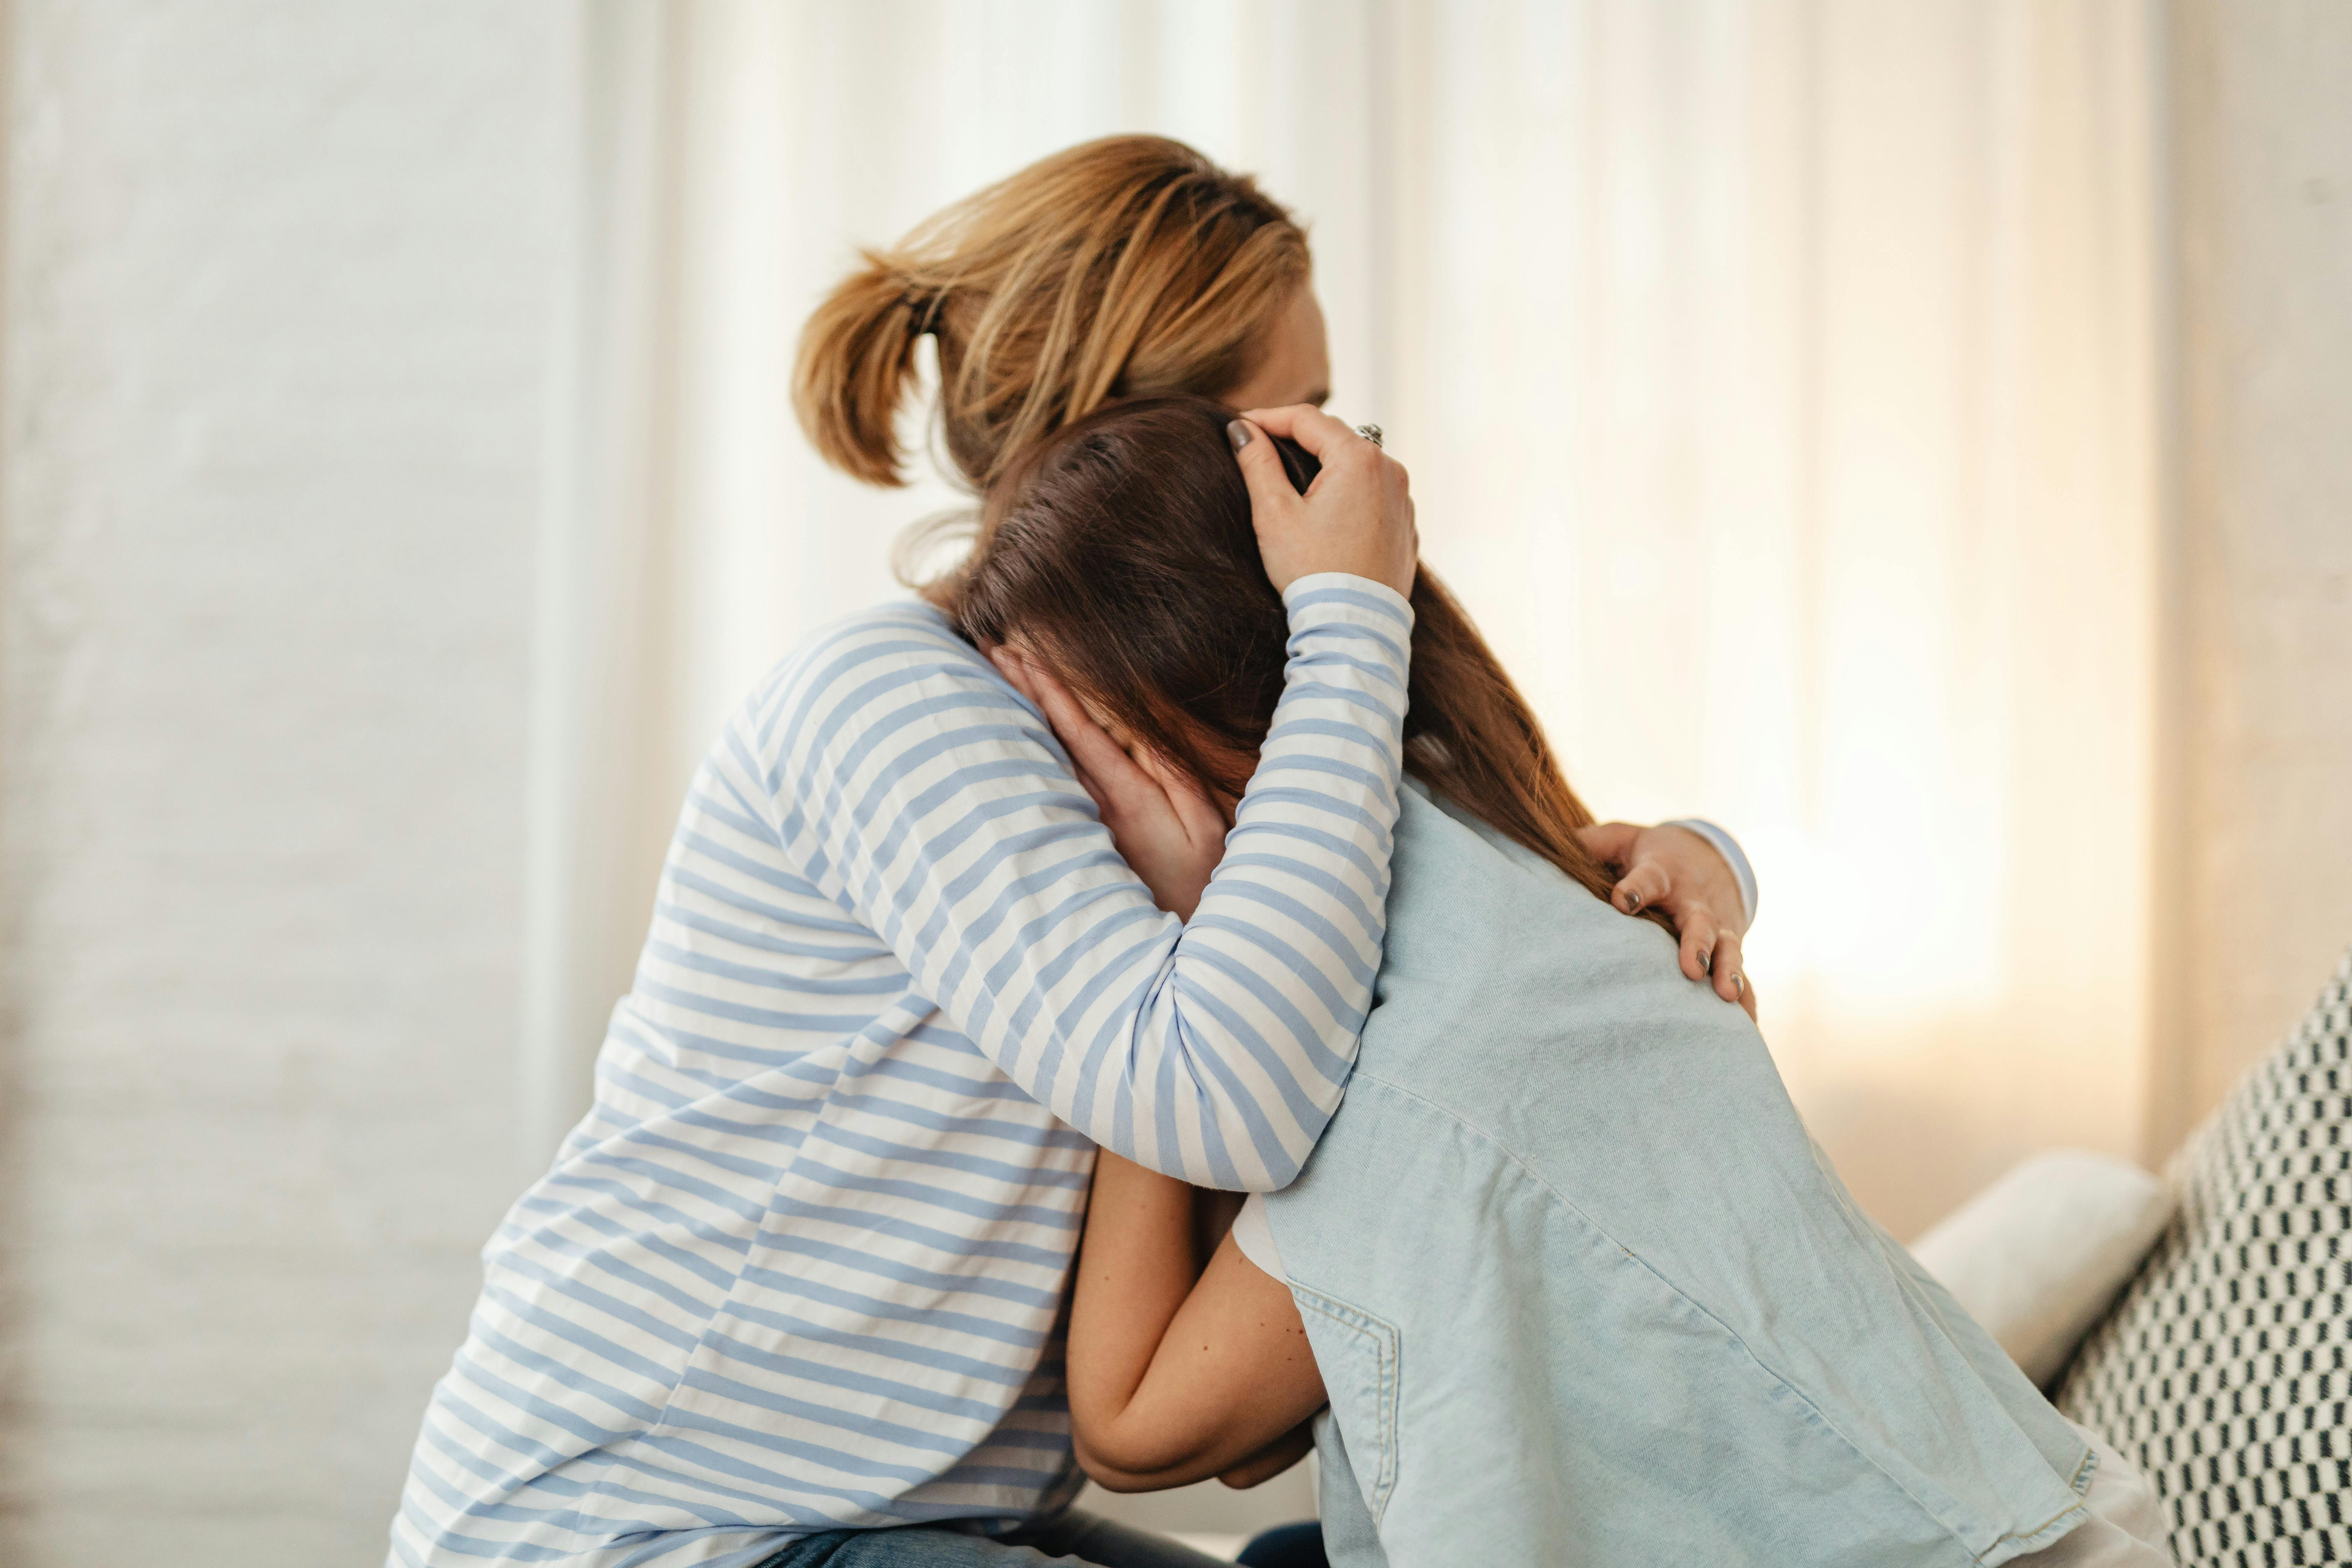 A mother comforting her crying daughter | Source: Pexels